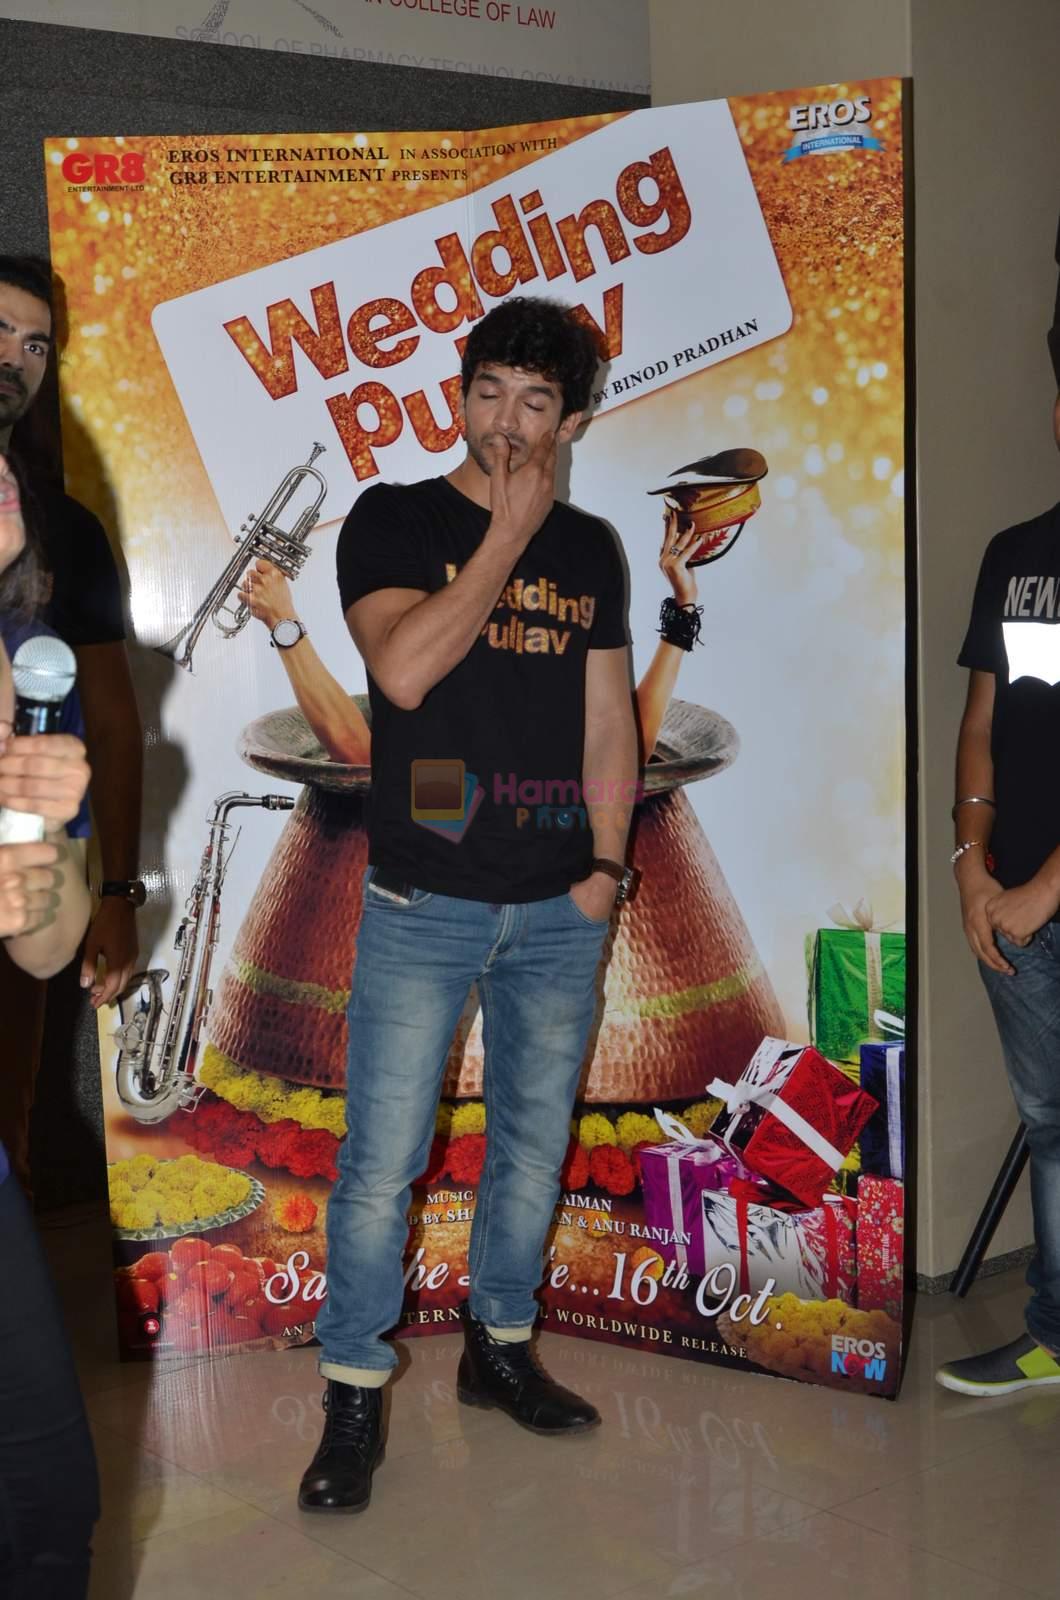 Diganth at wedding Pullav promotions at Law college in Vile parle on 22nd Sept 2015